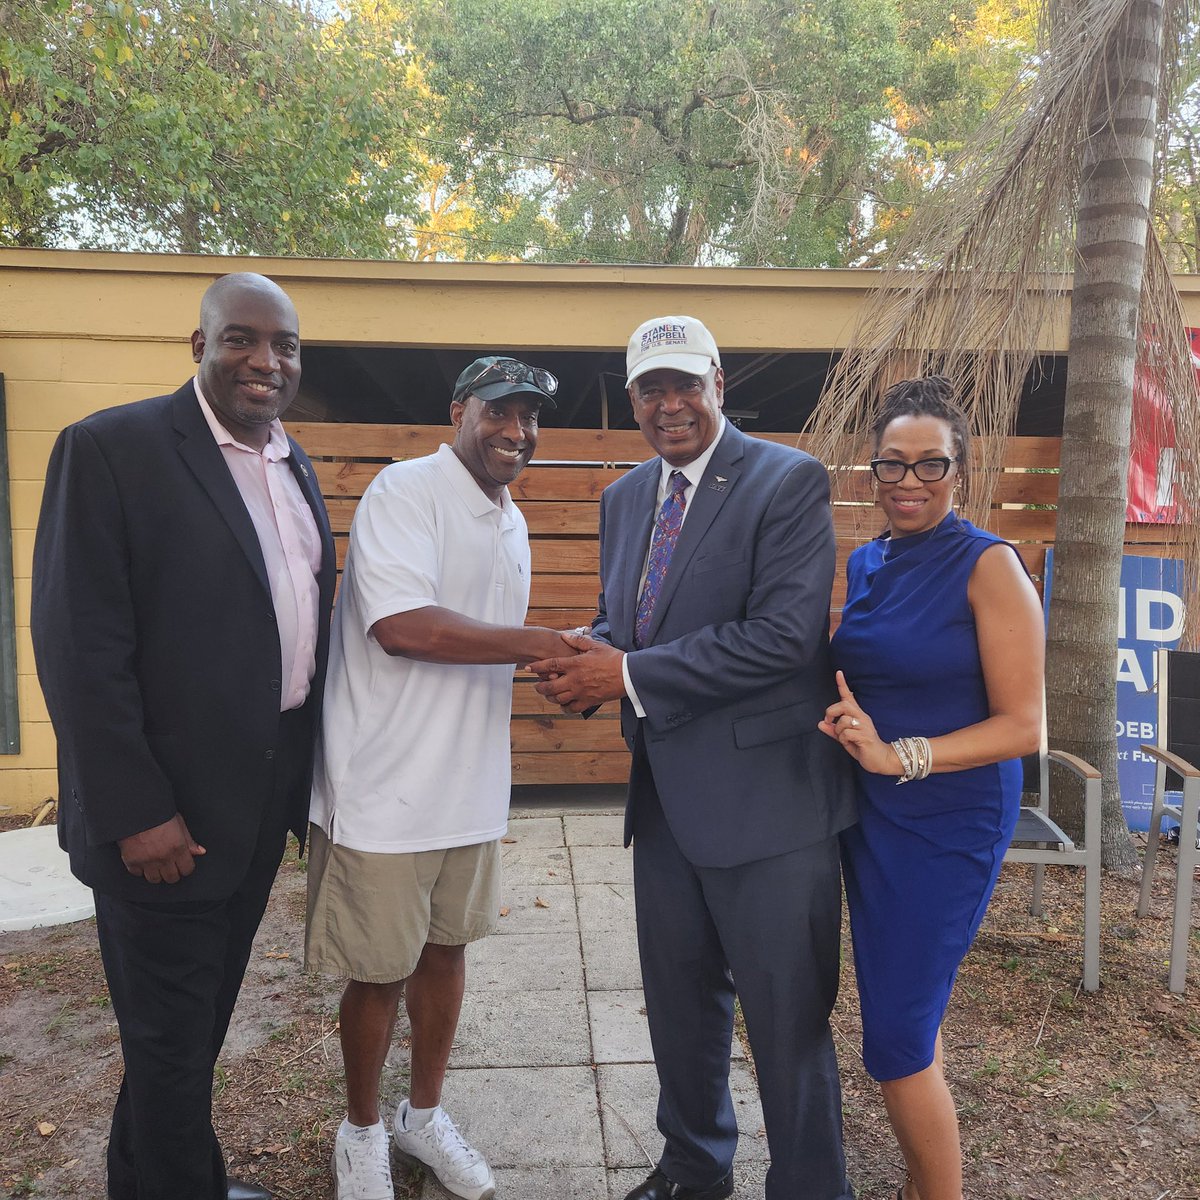 It was a pleasure speaking at the Red, White, and BBQ event! Thank you to everyone who attended. Together, we can stand for a better Florida. Please visit stanleyforflorida.com for more information.

#Tampa #StanleyforFlorida #Campbell2024 #HillsboroughCounty #Florida #FL